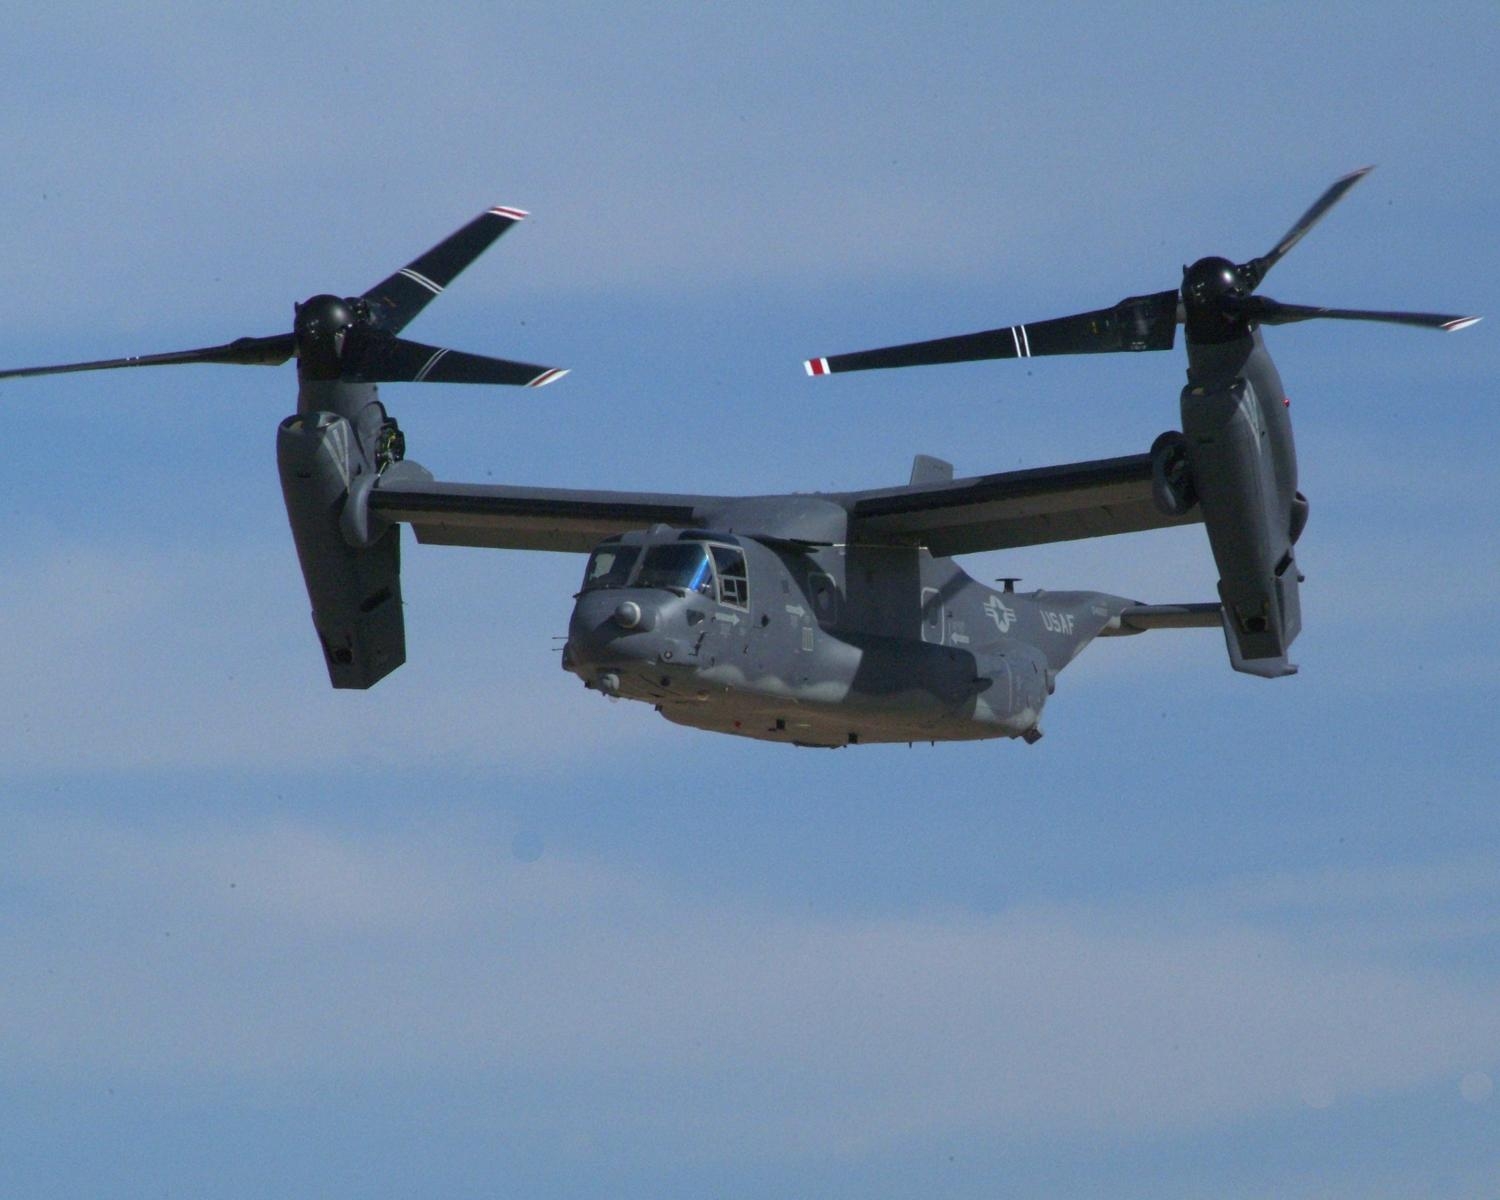 Black Bell Helicopter